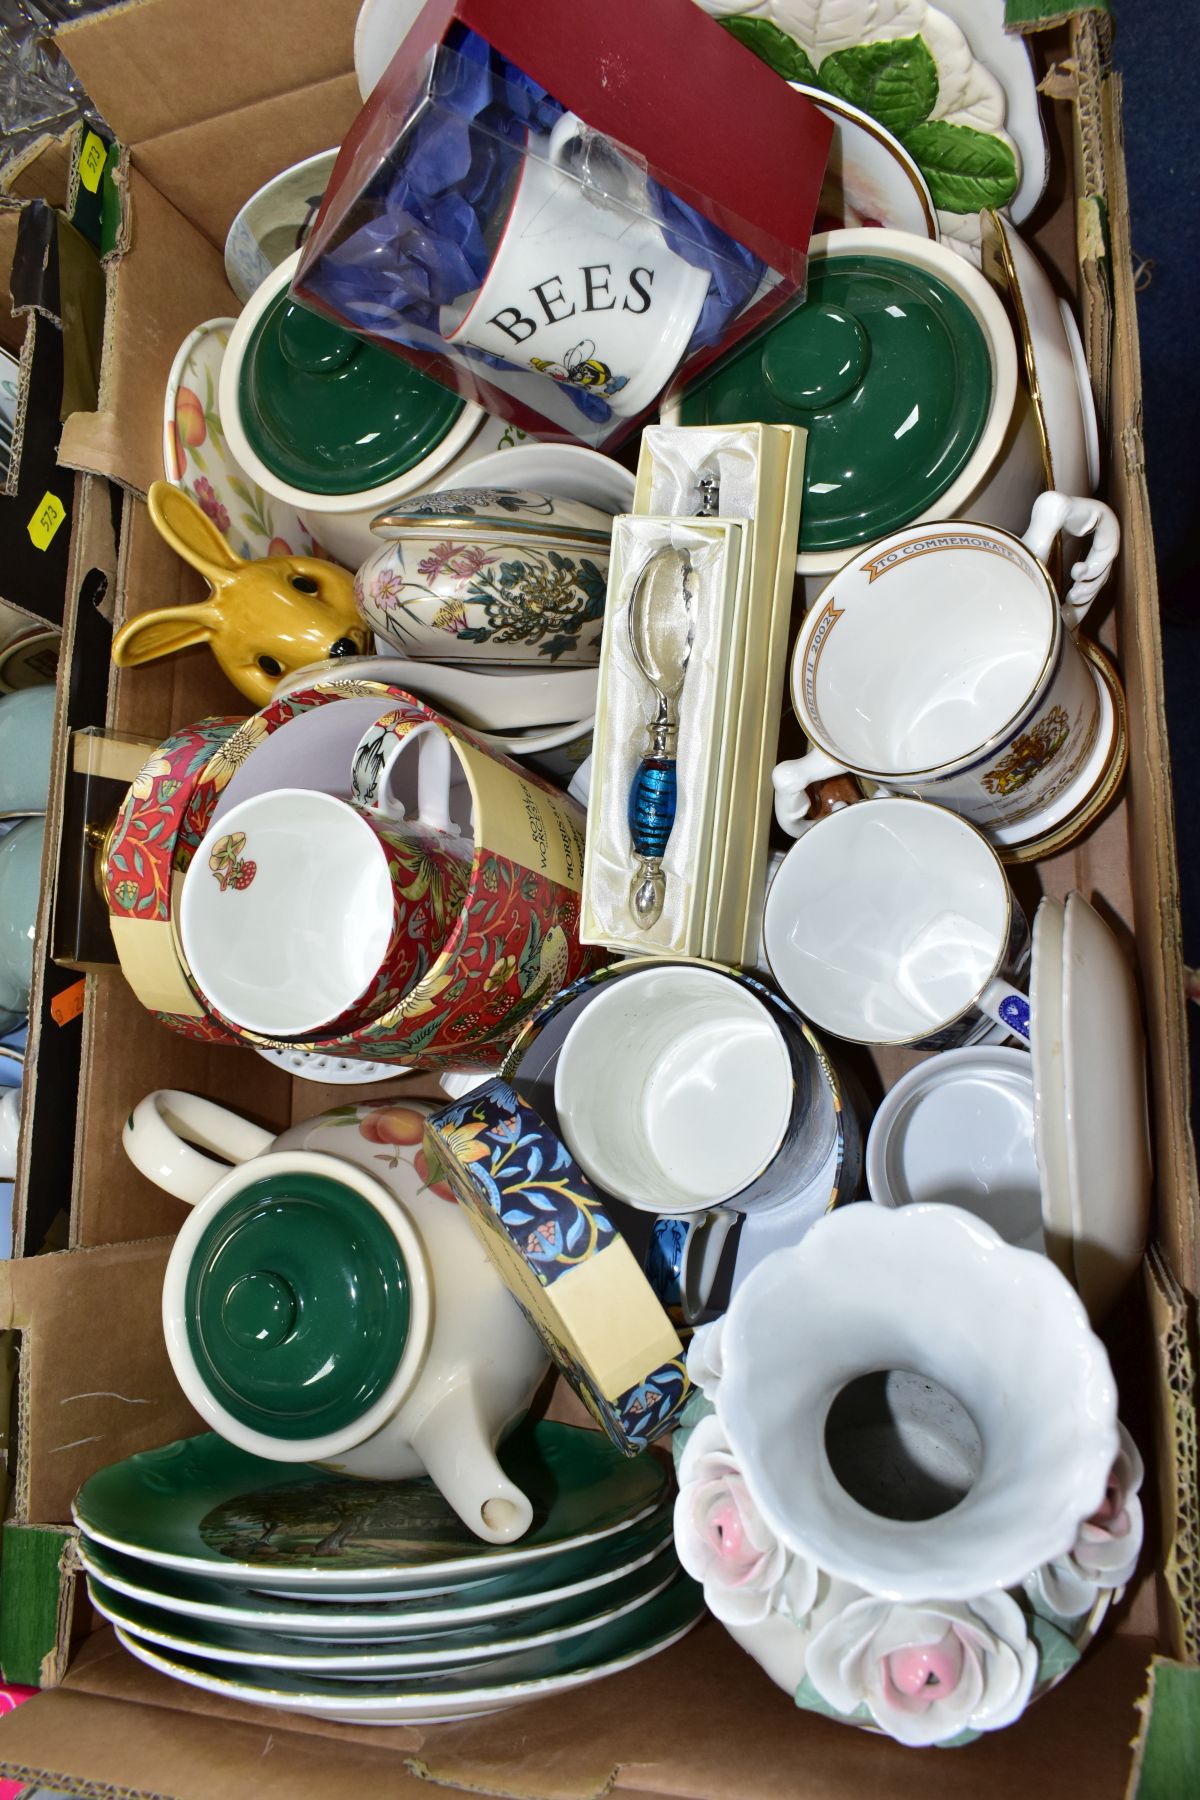 SIX BOXES AND LOOSE CERAMICS, GLASSWARES, KITCHEN ITEMS, ETC, to include Denby Marrakesh teacup - Image 4 of 10